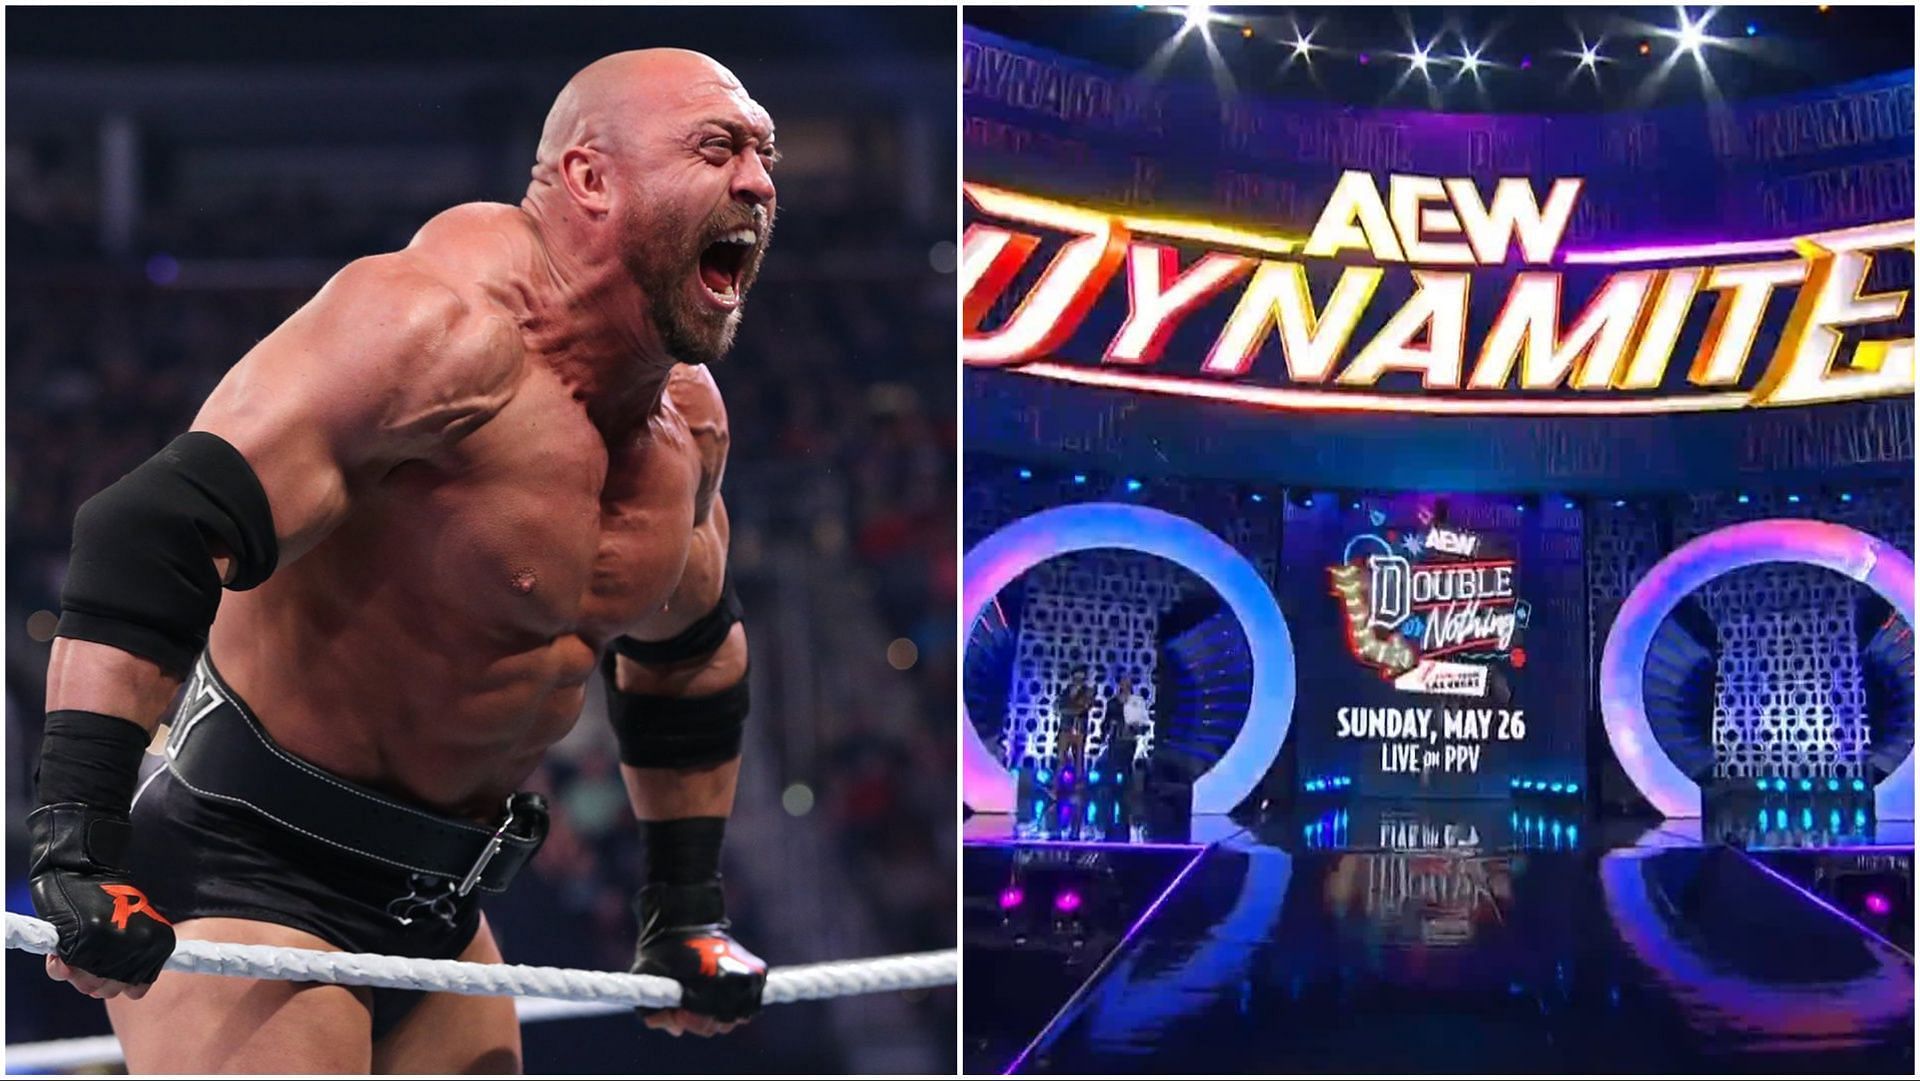 Ryback stands tall in the WWE ring, the stage and set for AEW Dynamite